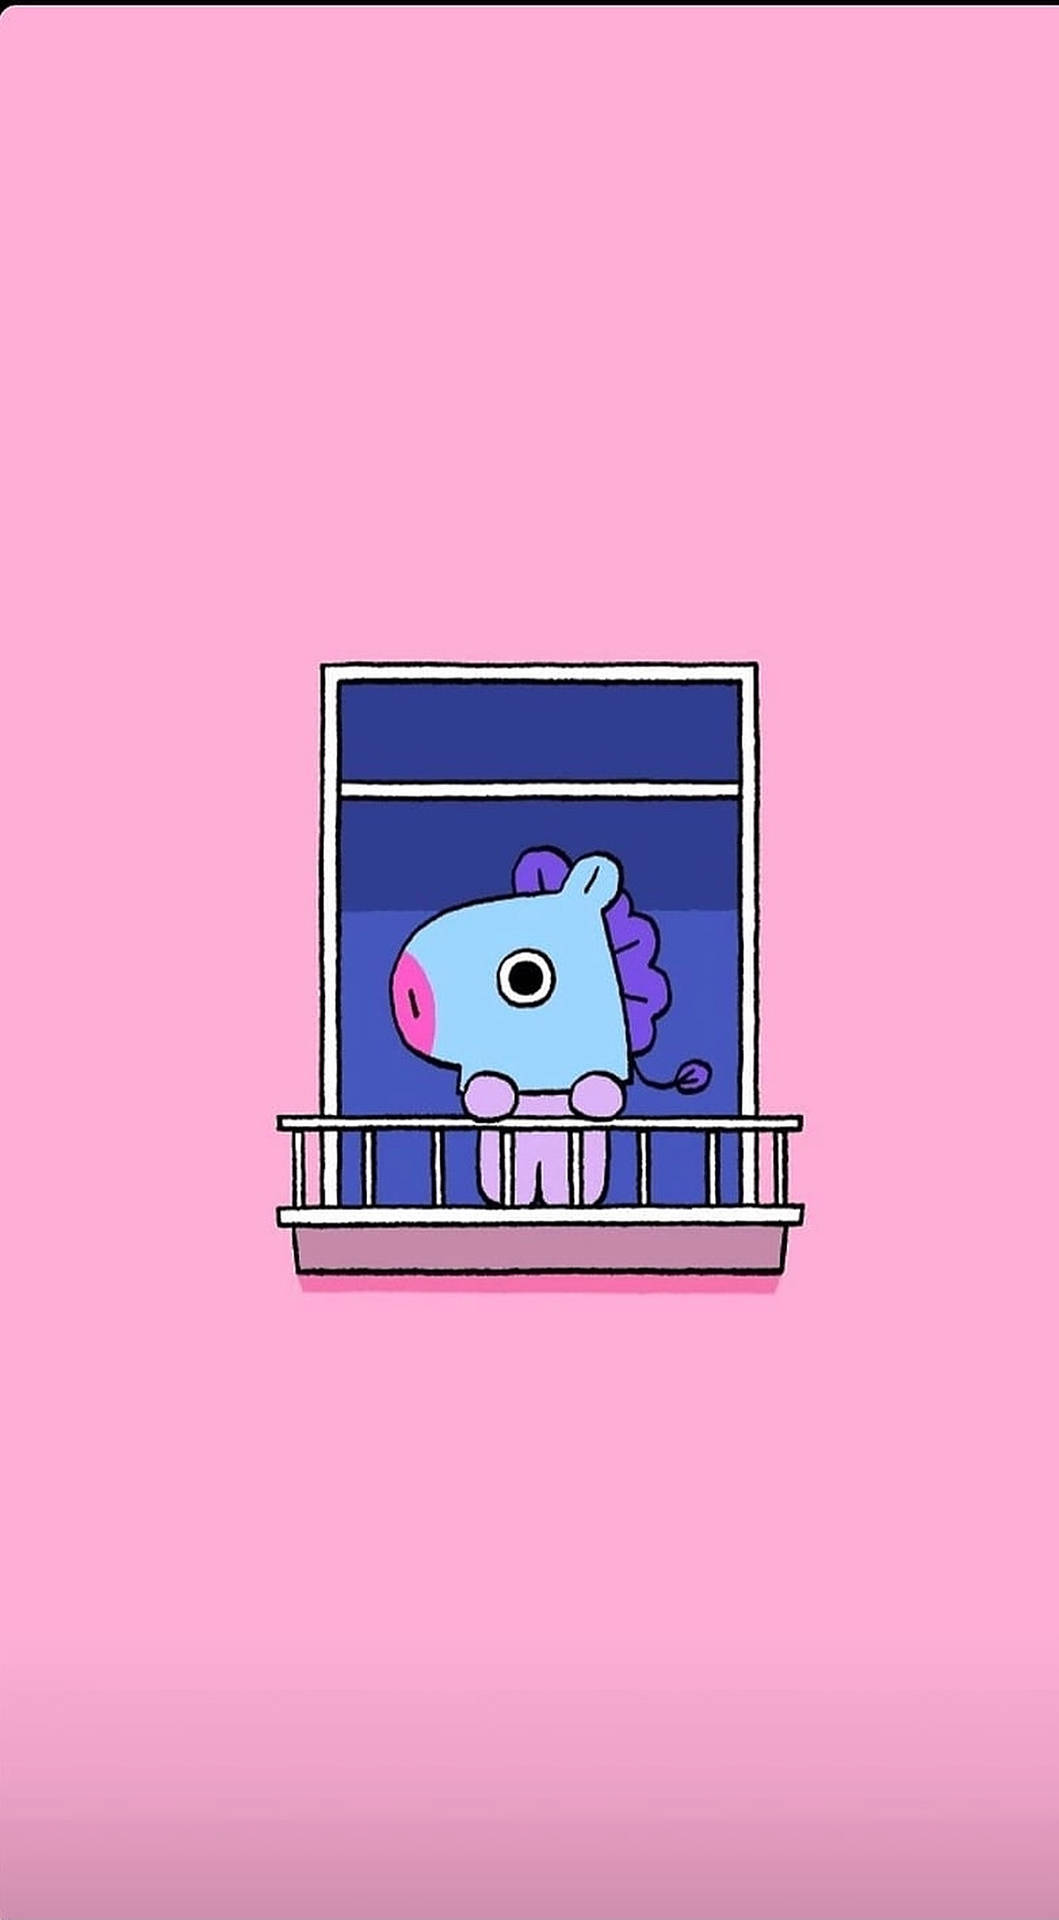 Mang Bt21 On The Balcony